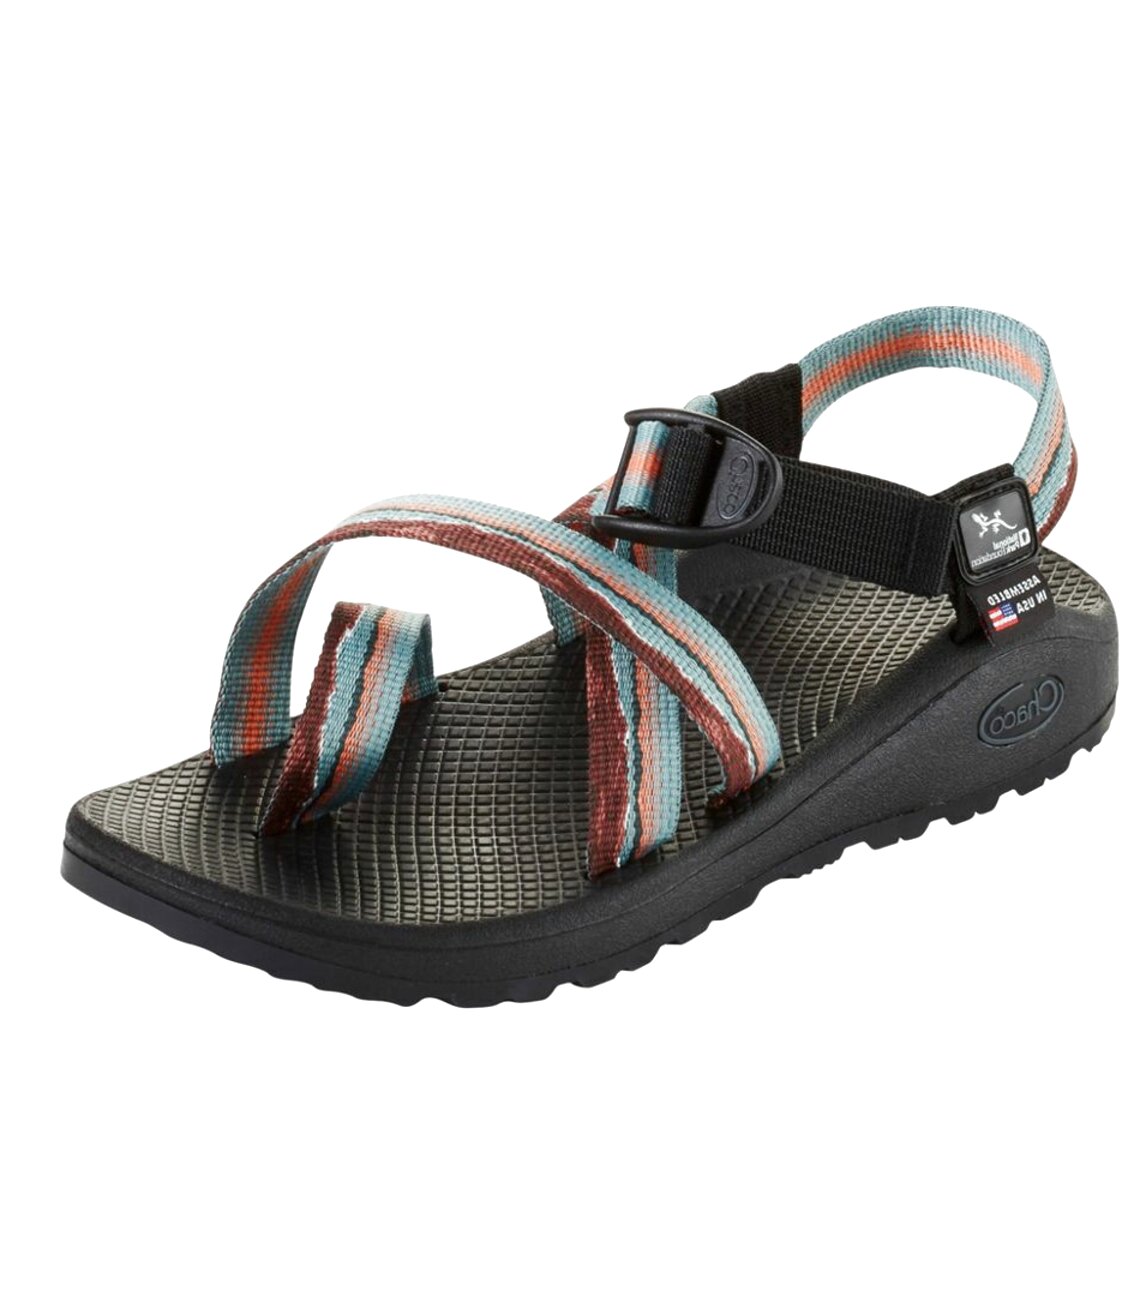 Chaco Sandals for sale in UK | 58 used Chaco Sandals